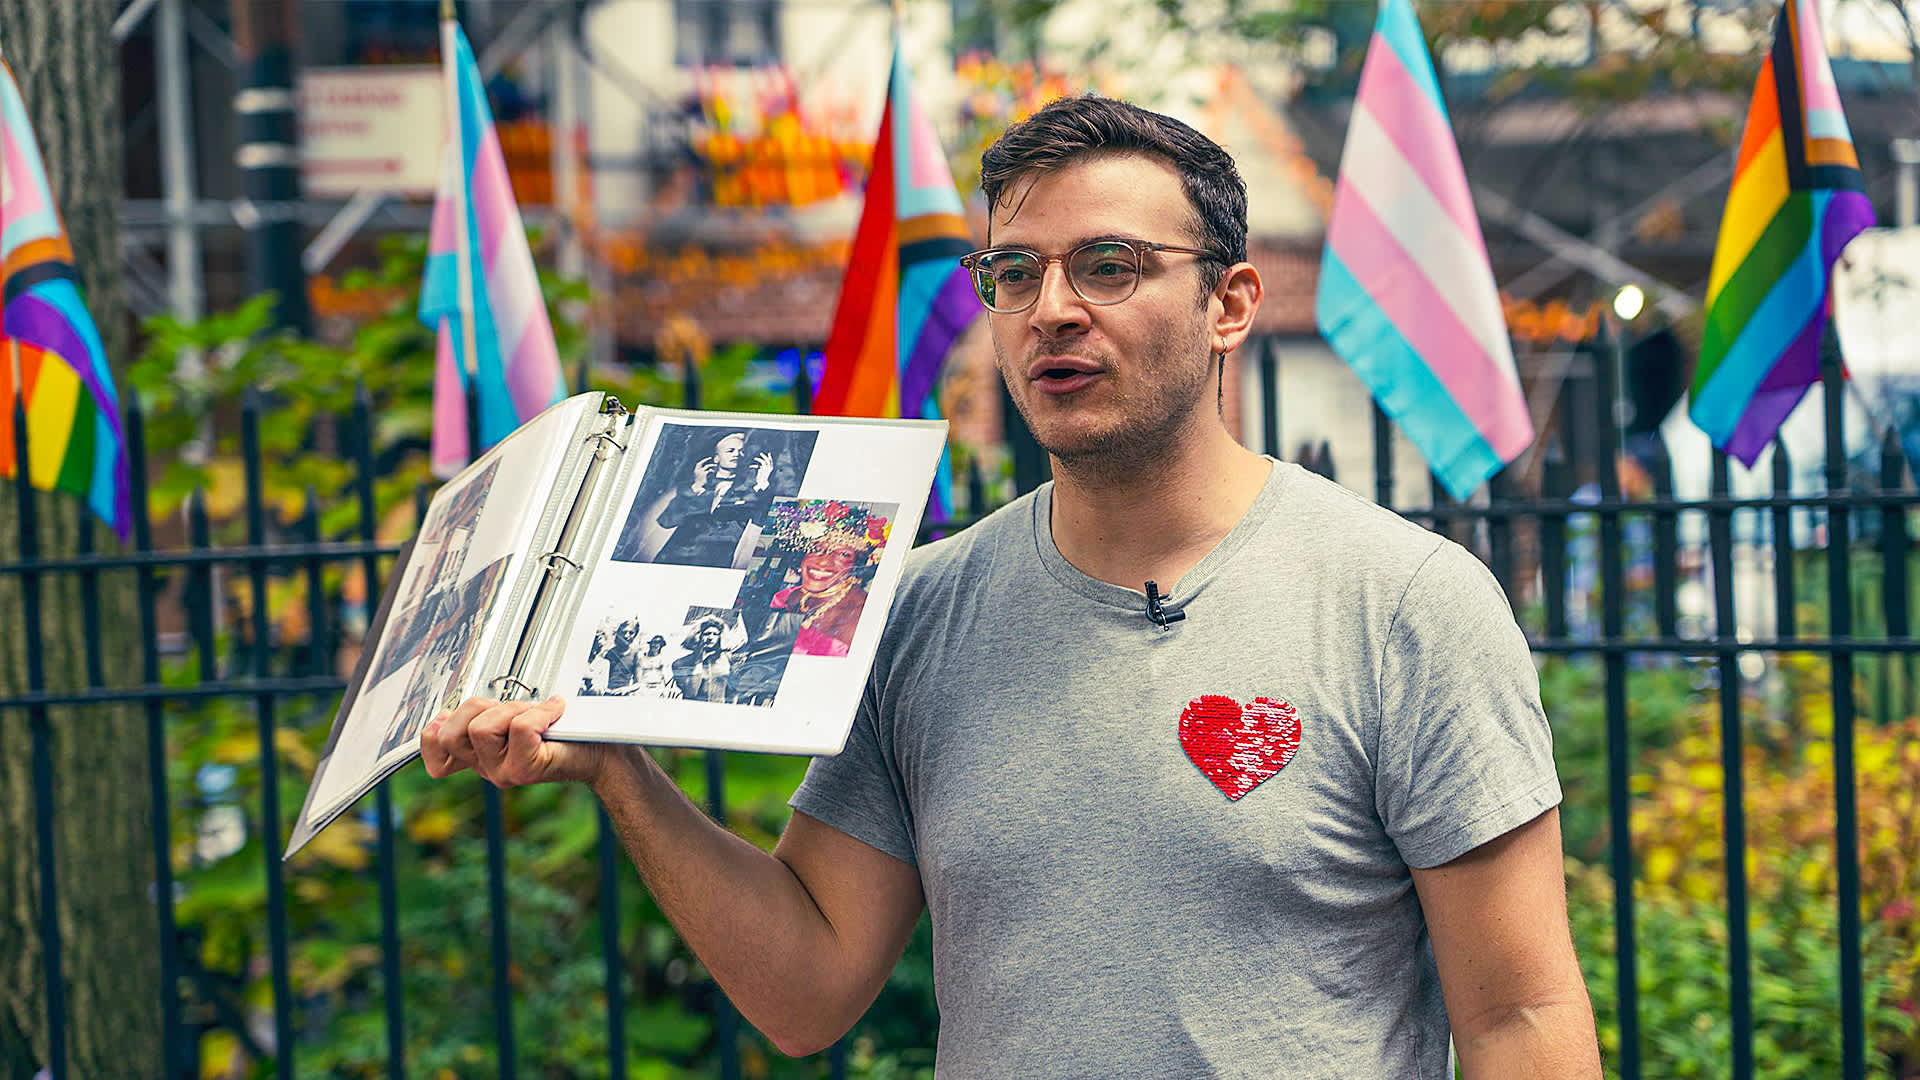 Learn LGBT history on these walking tours in NYC and beyond